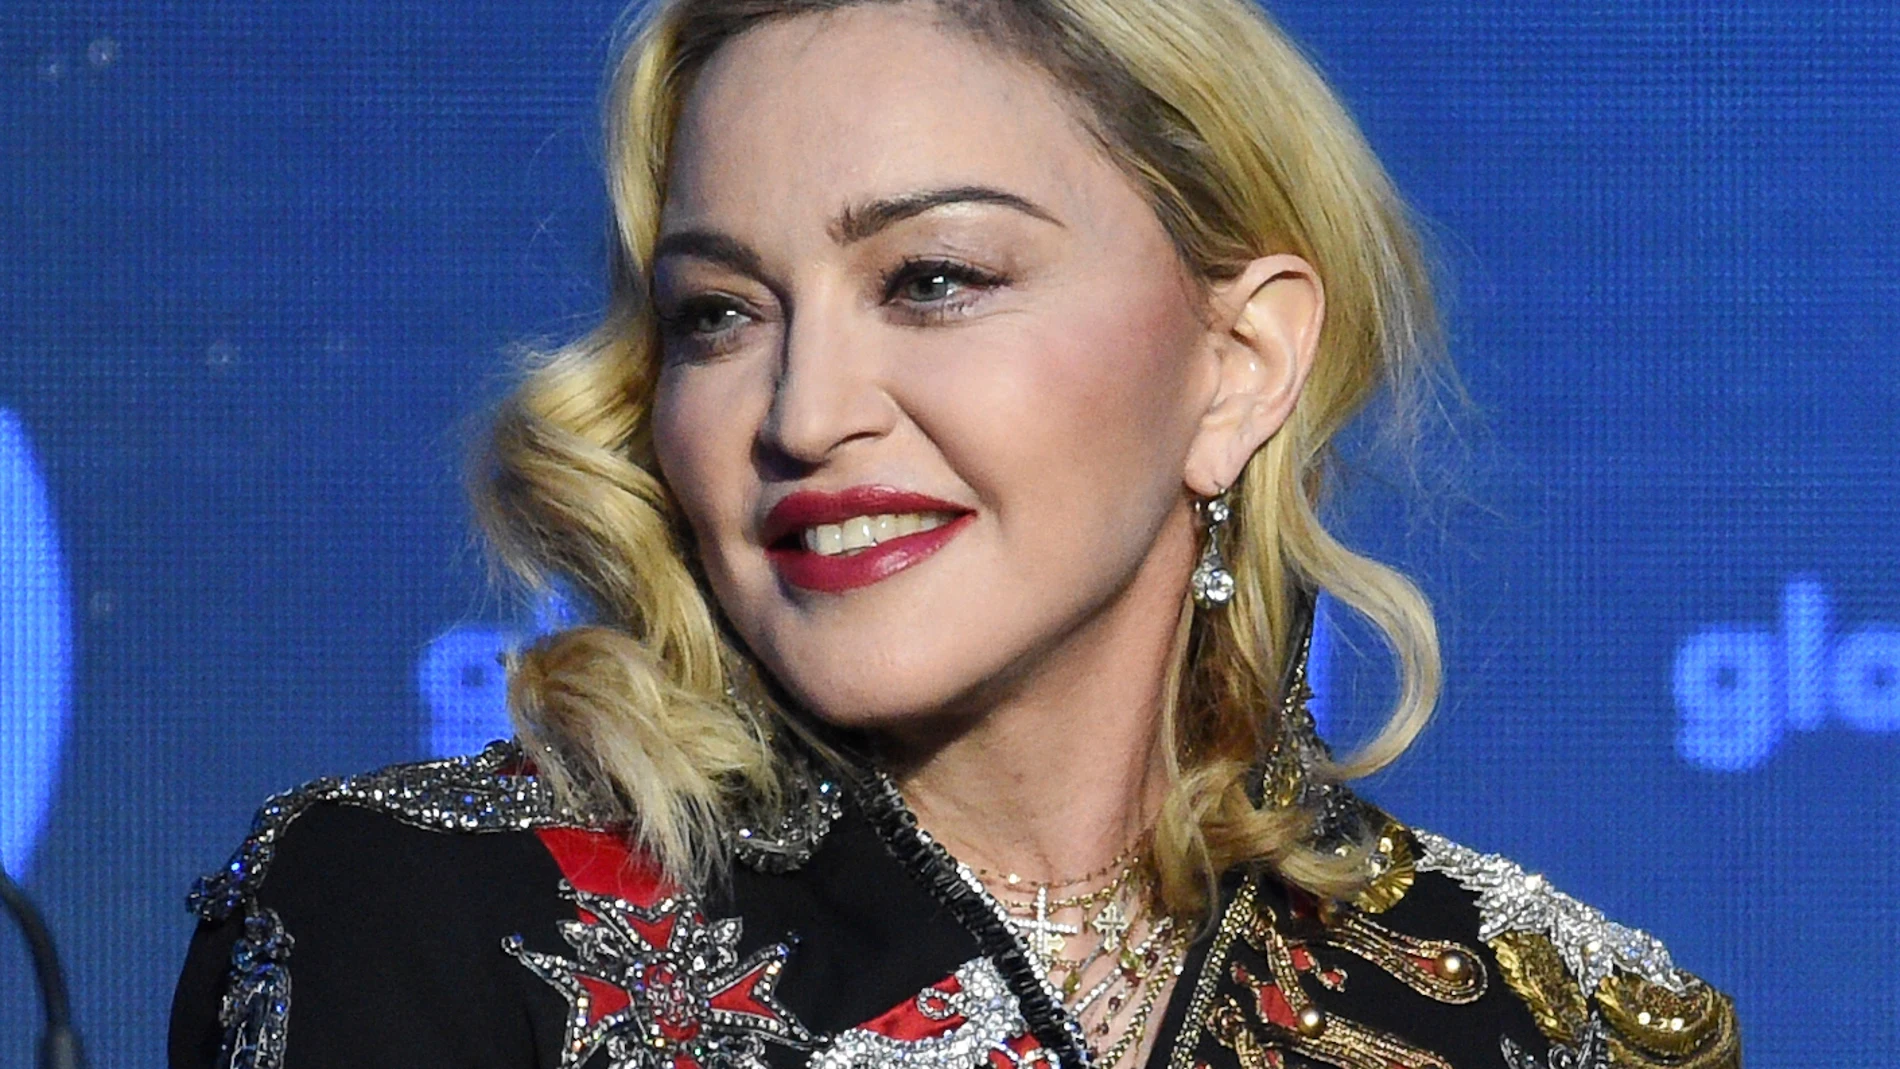 FILE - Madonna appears at the 30th annual GLAAD Media Awards in New York on May 4, 2019, in New York. . (Photo by Evan Agostini/Invision/AP, File)